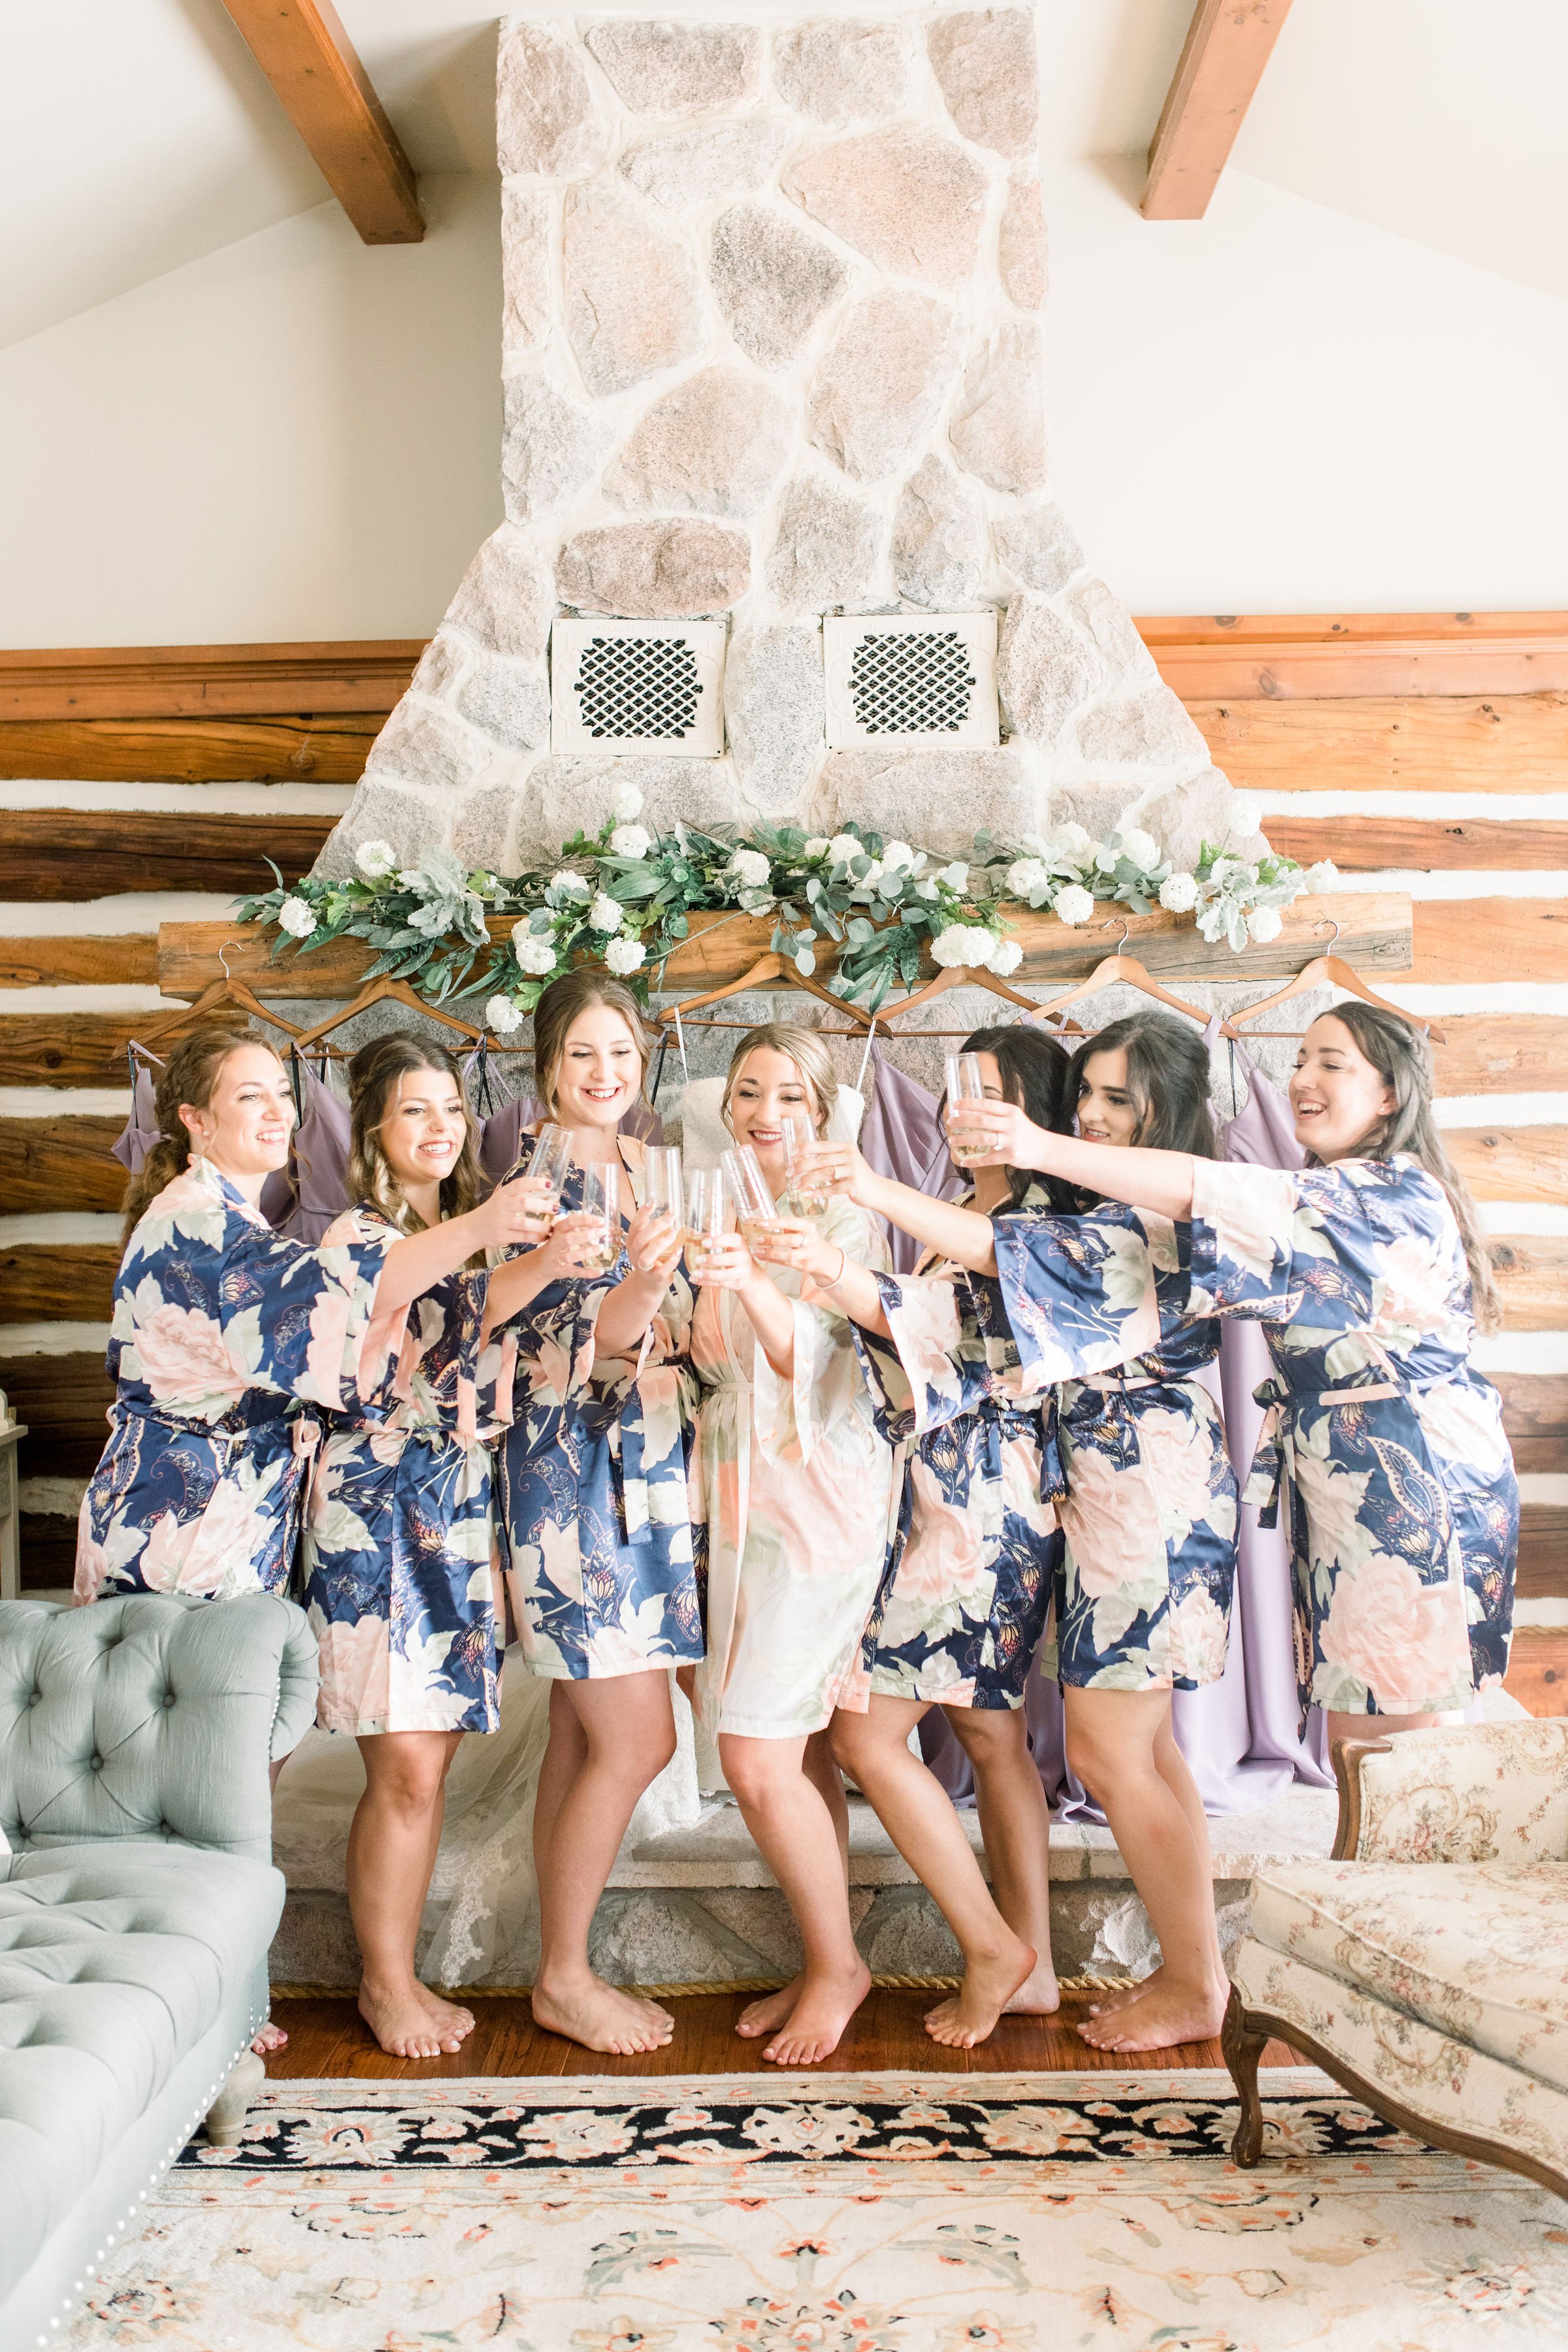  Bridesmaids in front of a stone fireplace in floral robes toasting by Chelsea Mason Photography. floral bridesmaid robe toasting #StonefieldEstates #Ontarioweddings #Chelseamasonphotography #Chelseamasonengagements #Ontarioweddingphotographers 